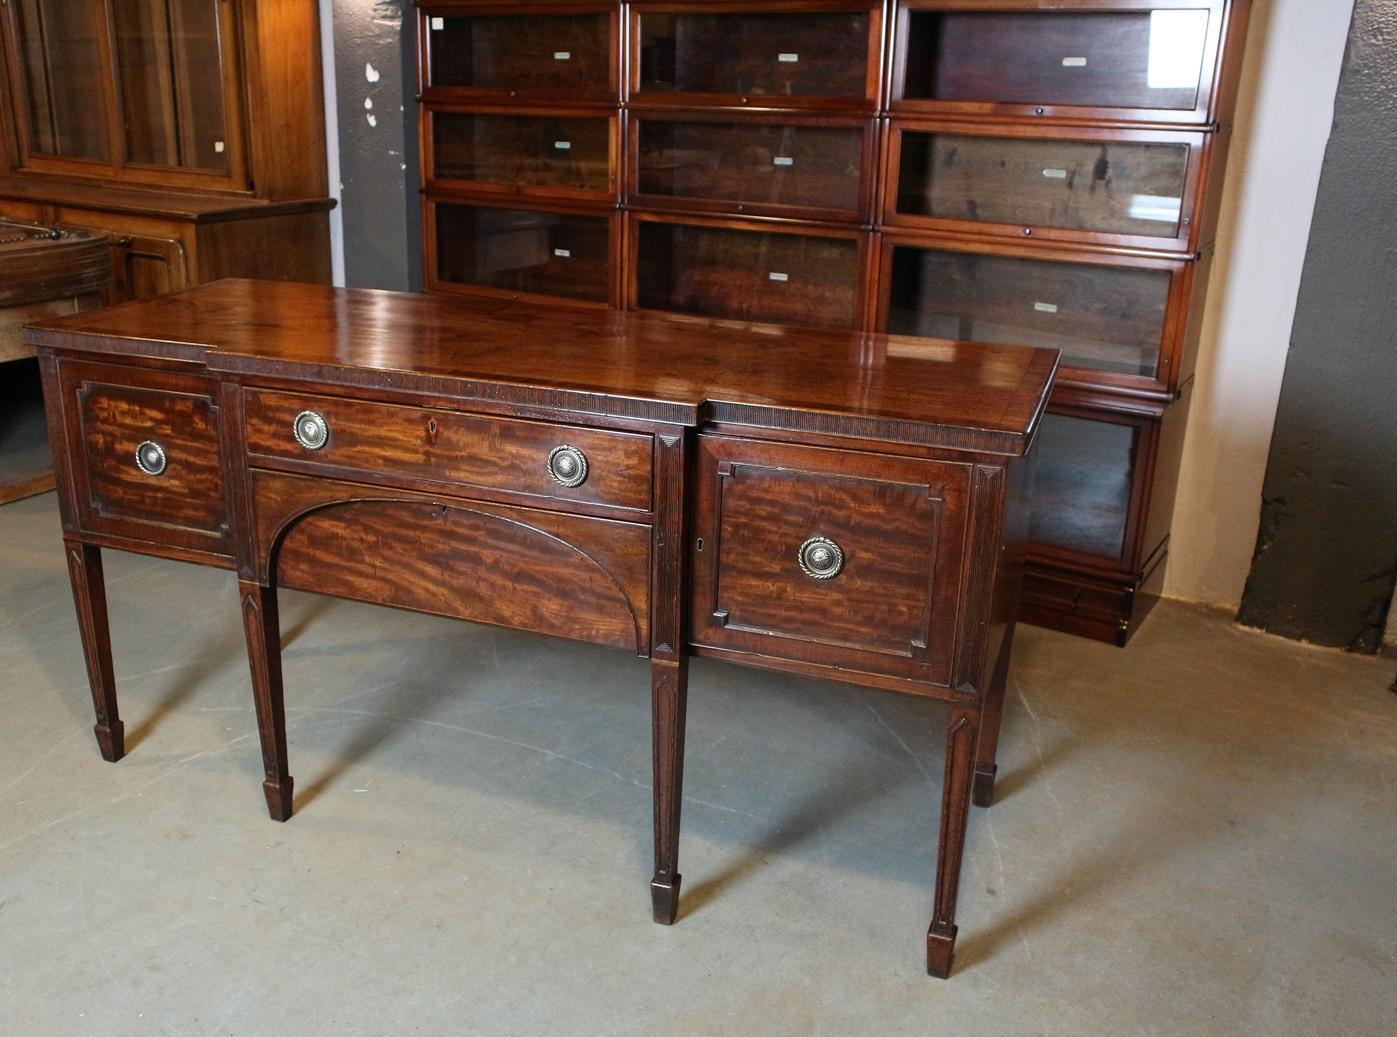 Beautifully mahogany Georgian sideboard. Entirely in original condition. Beautiful patina. The table has 2 drawers in the middle and 2 cupboards. It is a break-front model. The right cabinet was used for the wine bottles, therefore the bottom is